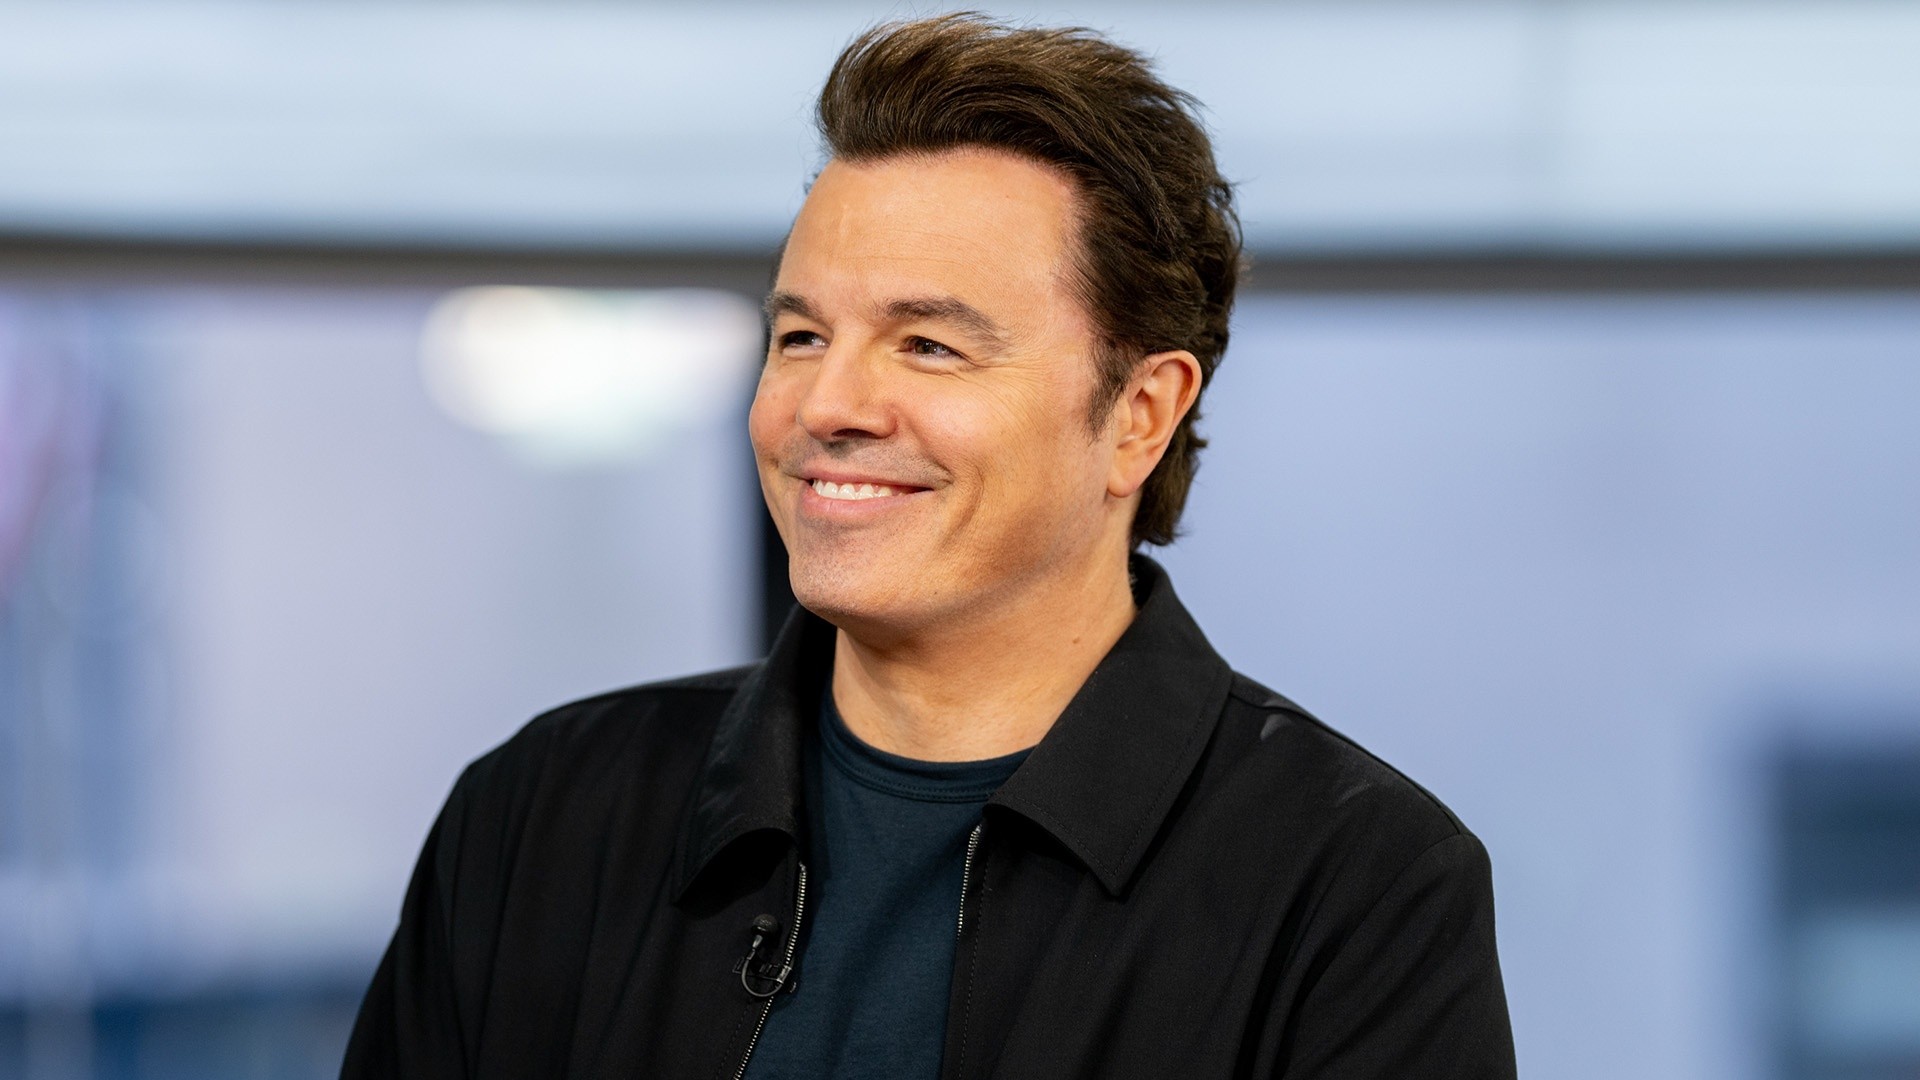 Seth MacFarlane on how he brought 'Ted' prequel to life